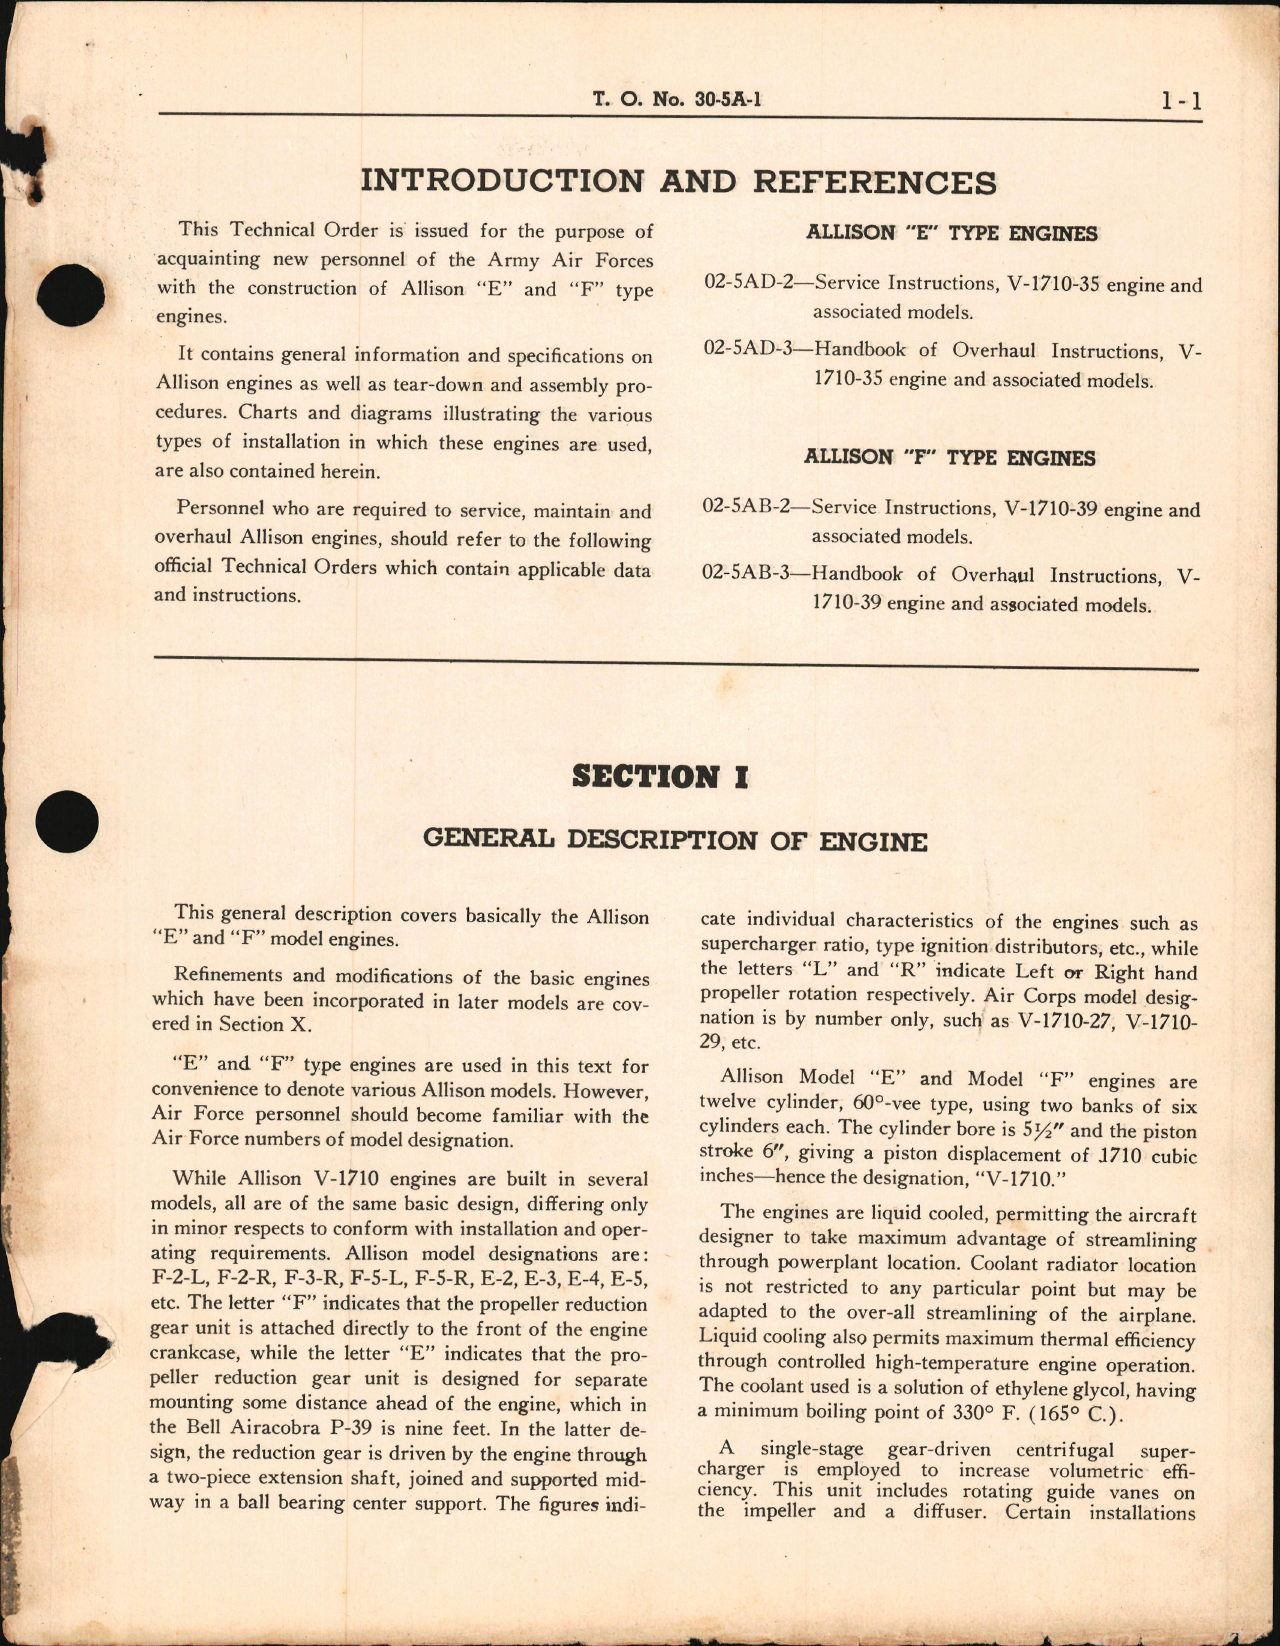 Sample page 5 from AirCorps Library document: Information Guide for Allison V-1710 E and F Engines